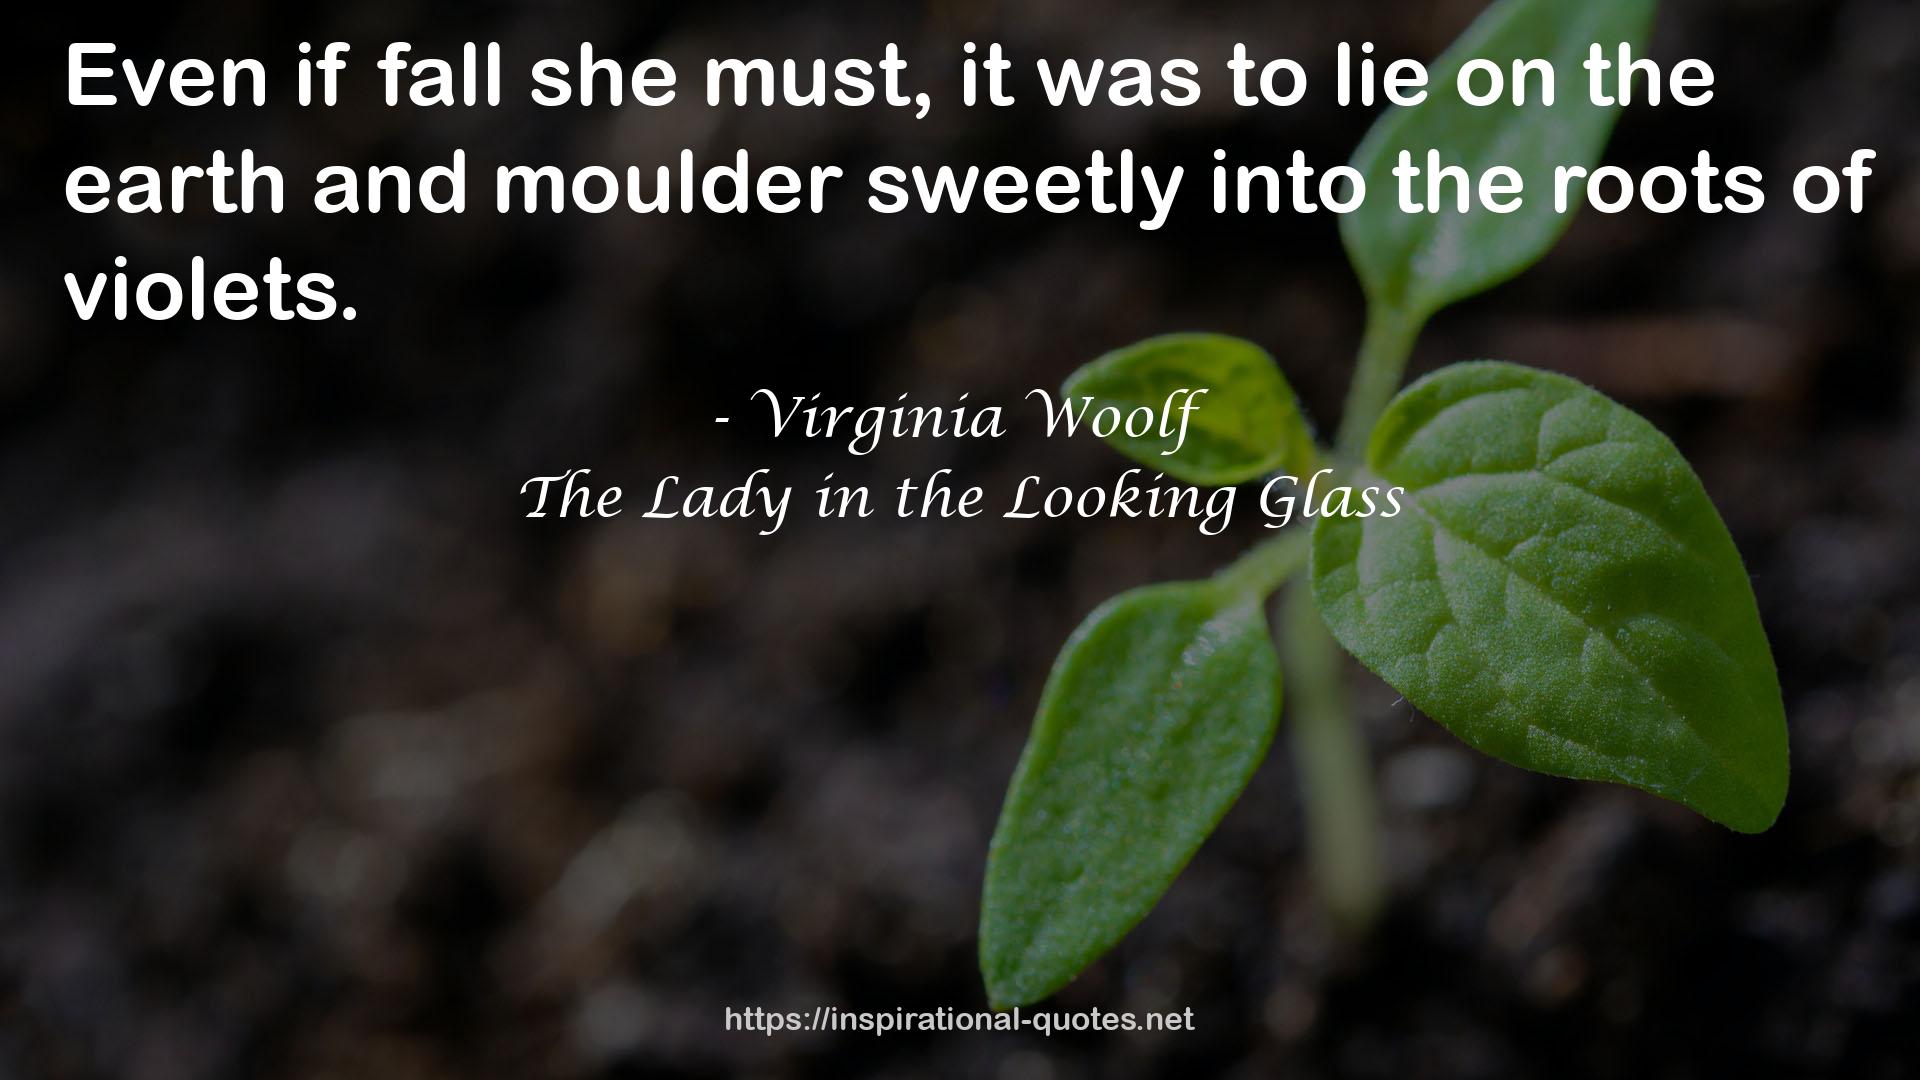 The Lady in the Looking Glass QUOTES